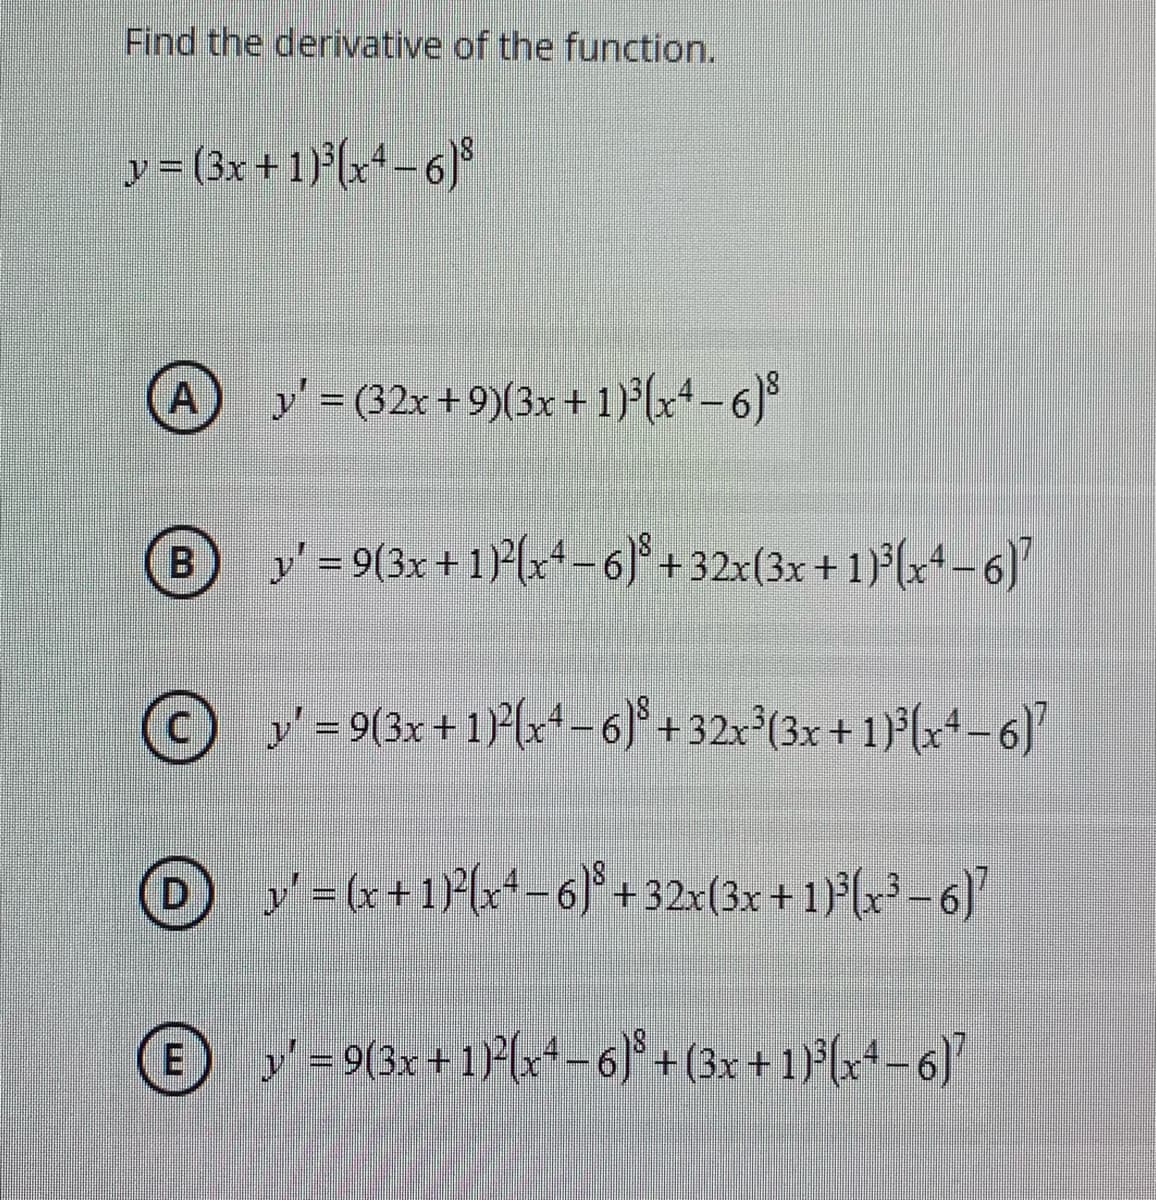 Find the derivative of the function.
y = (3x + 1)(x+ -6)
y' = (32x + 9)(3x+ 1) (x+-6)°
%3D
y' = 9(3x + 1)(x+-6)° +32x(3x +1)°(x+ -6)
© y-9(3x + 1) (x-6)* + 32x{(3x +1}*(x* =6)
O y-G+1P{x-6 + 32x(3x + 1)(x² –6)
E
-9(3x + 1{+ -6* + (3x + 1F(x+-6)
